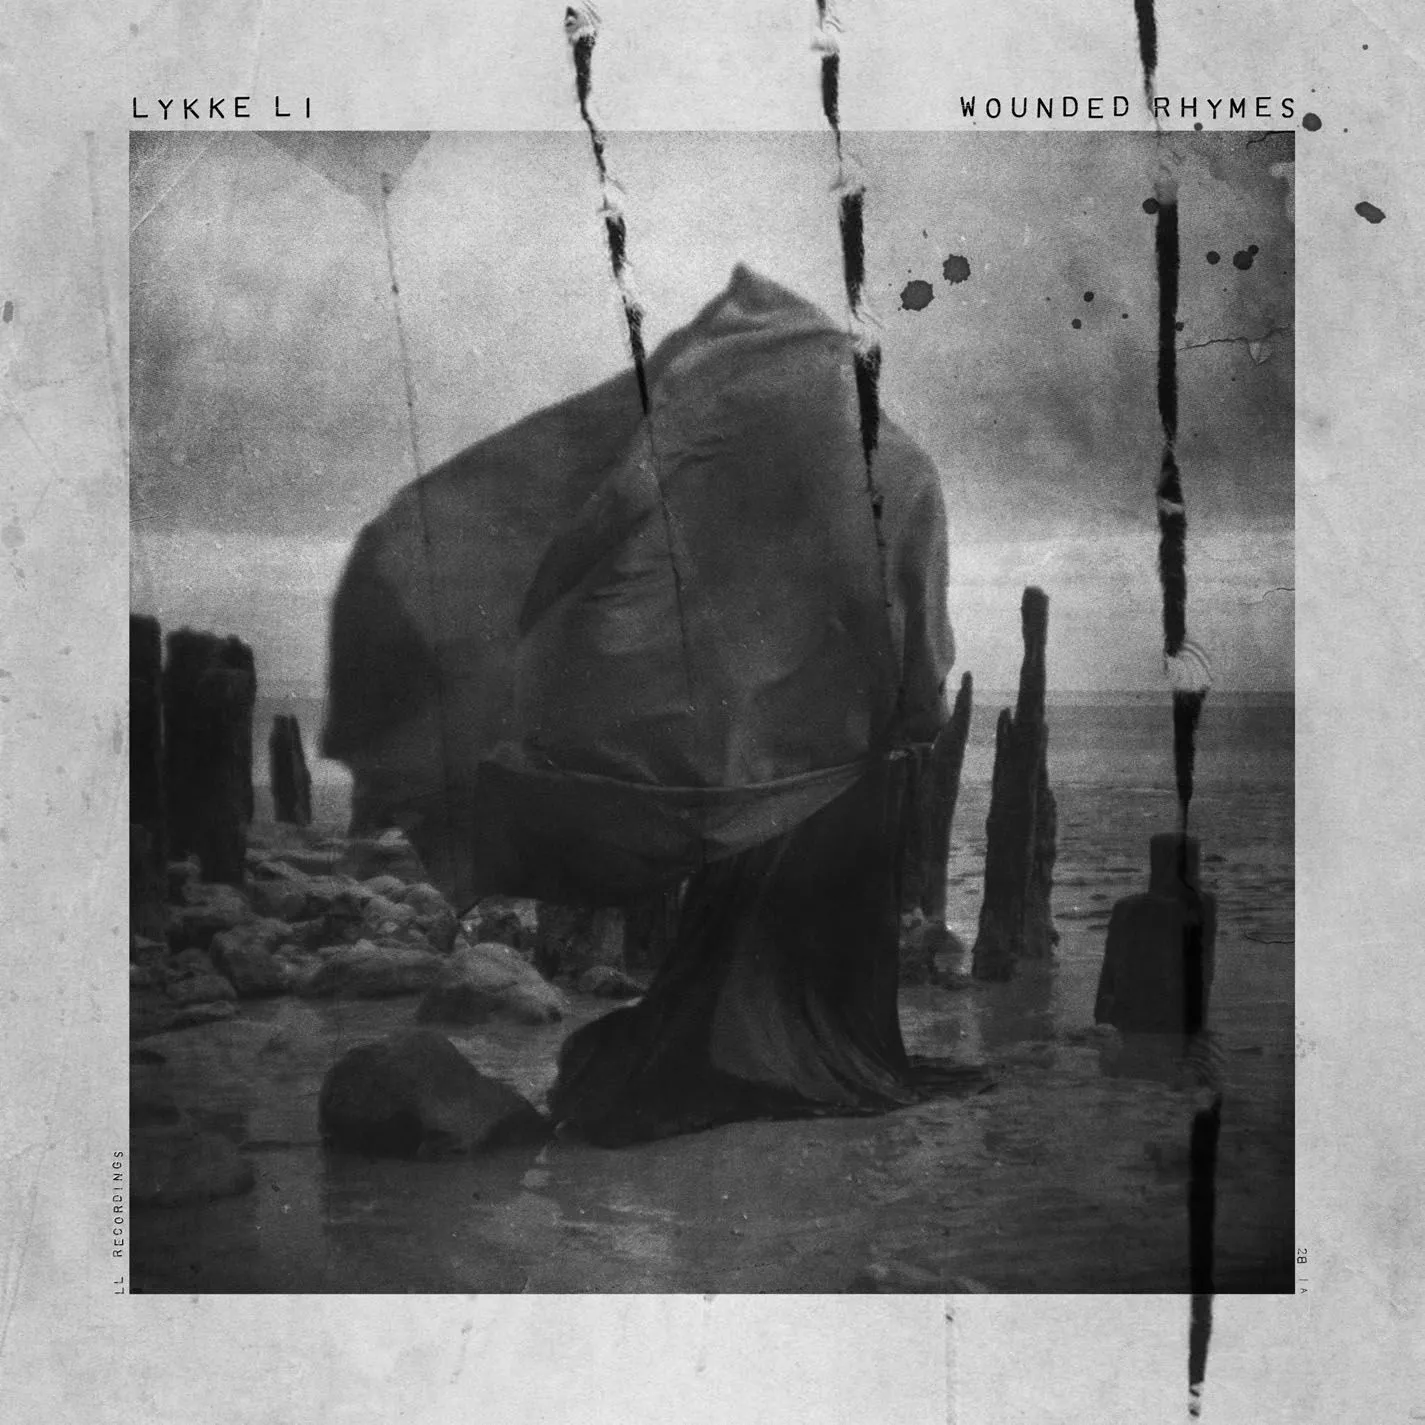 <strong>Lykke Li - Wounded Rhymes (Anniversary Edition)</strong> (Vinyl LP - black)